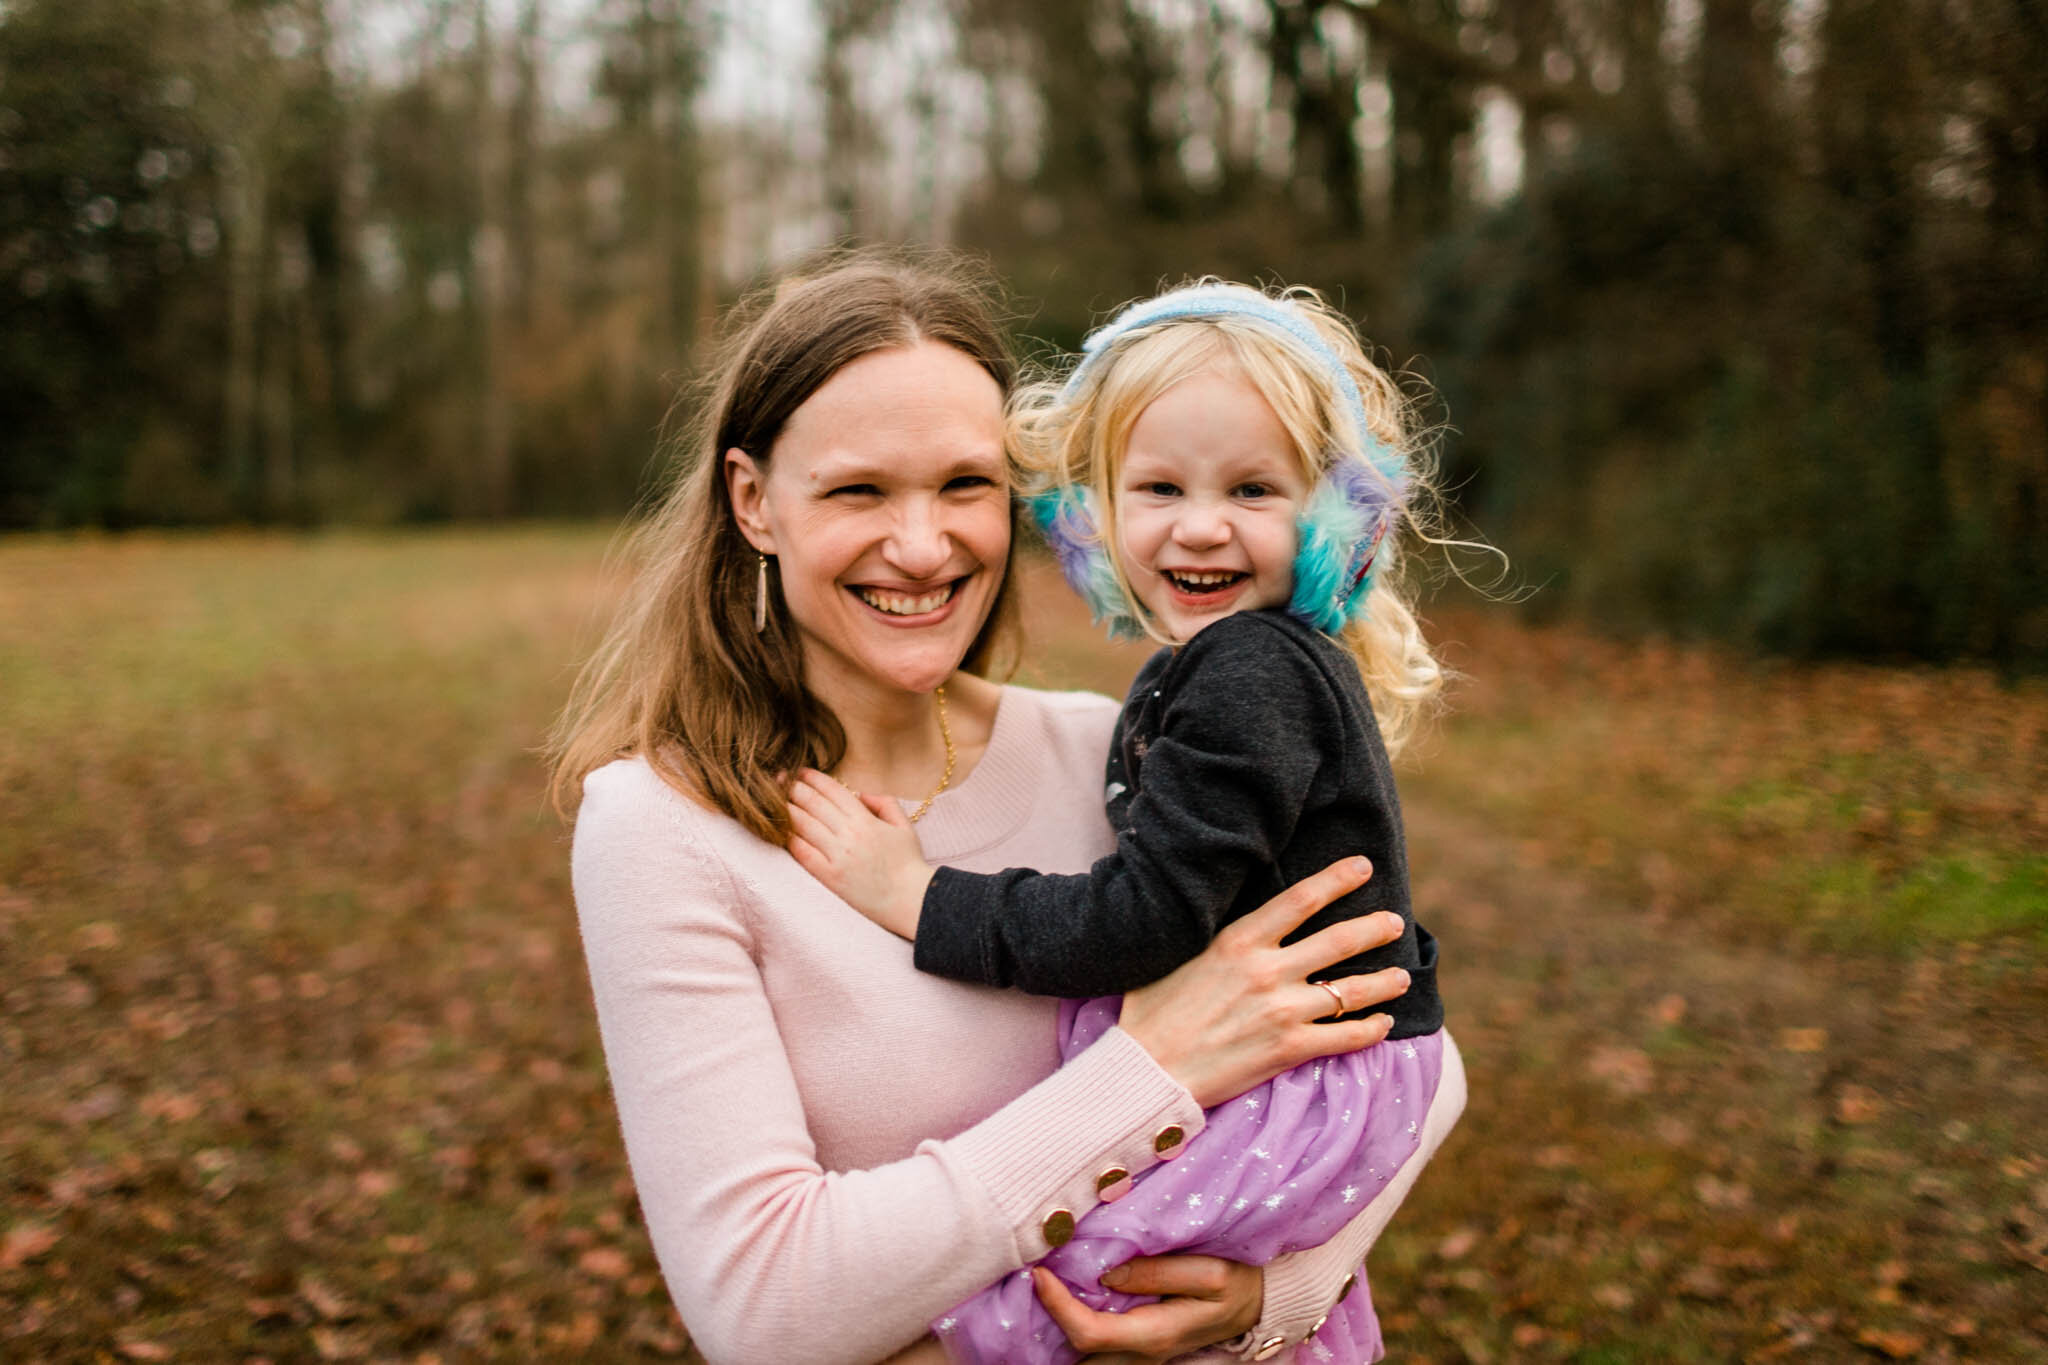 Durham Family Photographer | By G. Lin Photography | Candid portrait of mother and daughter